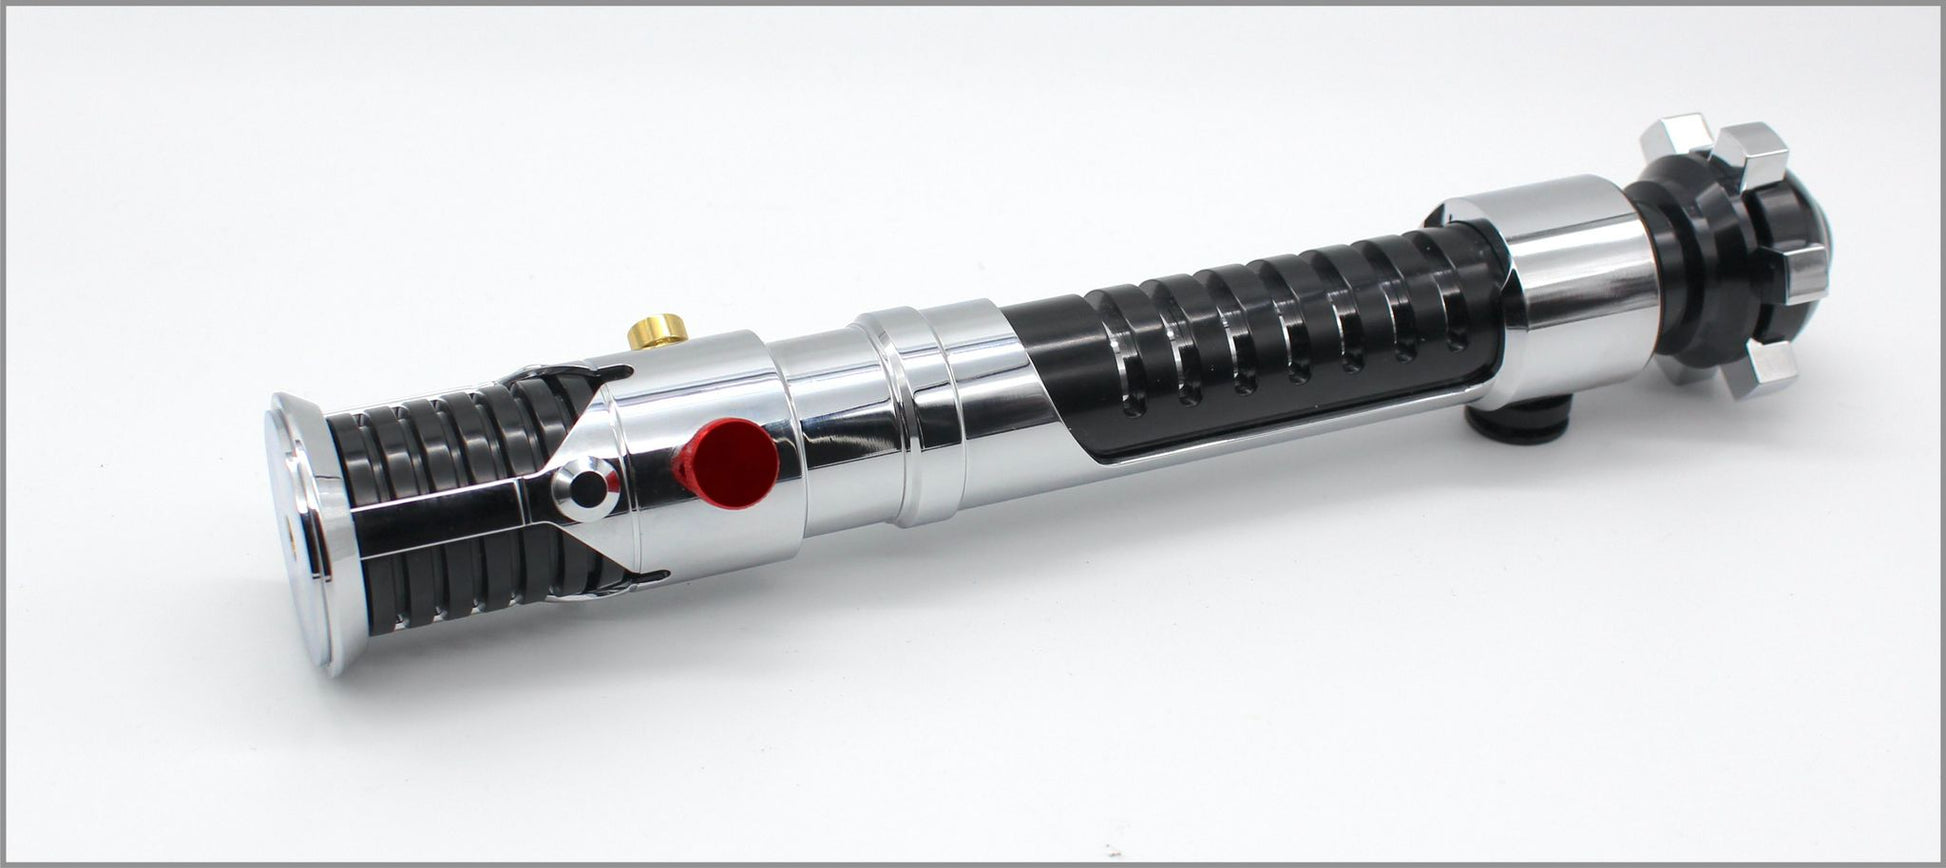 Collectors Edition Lightsaber - Collectors Edition Saber - KR OWK Apprentice 1 - Padawan Outpost